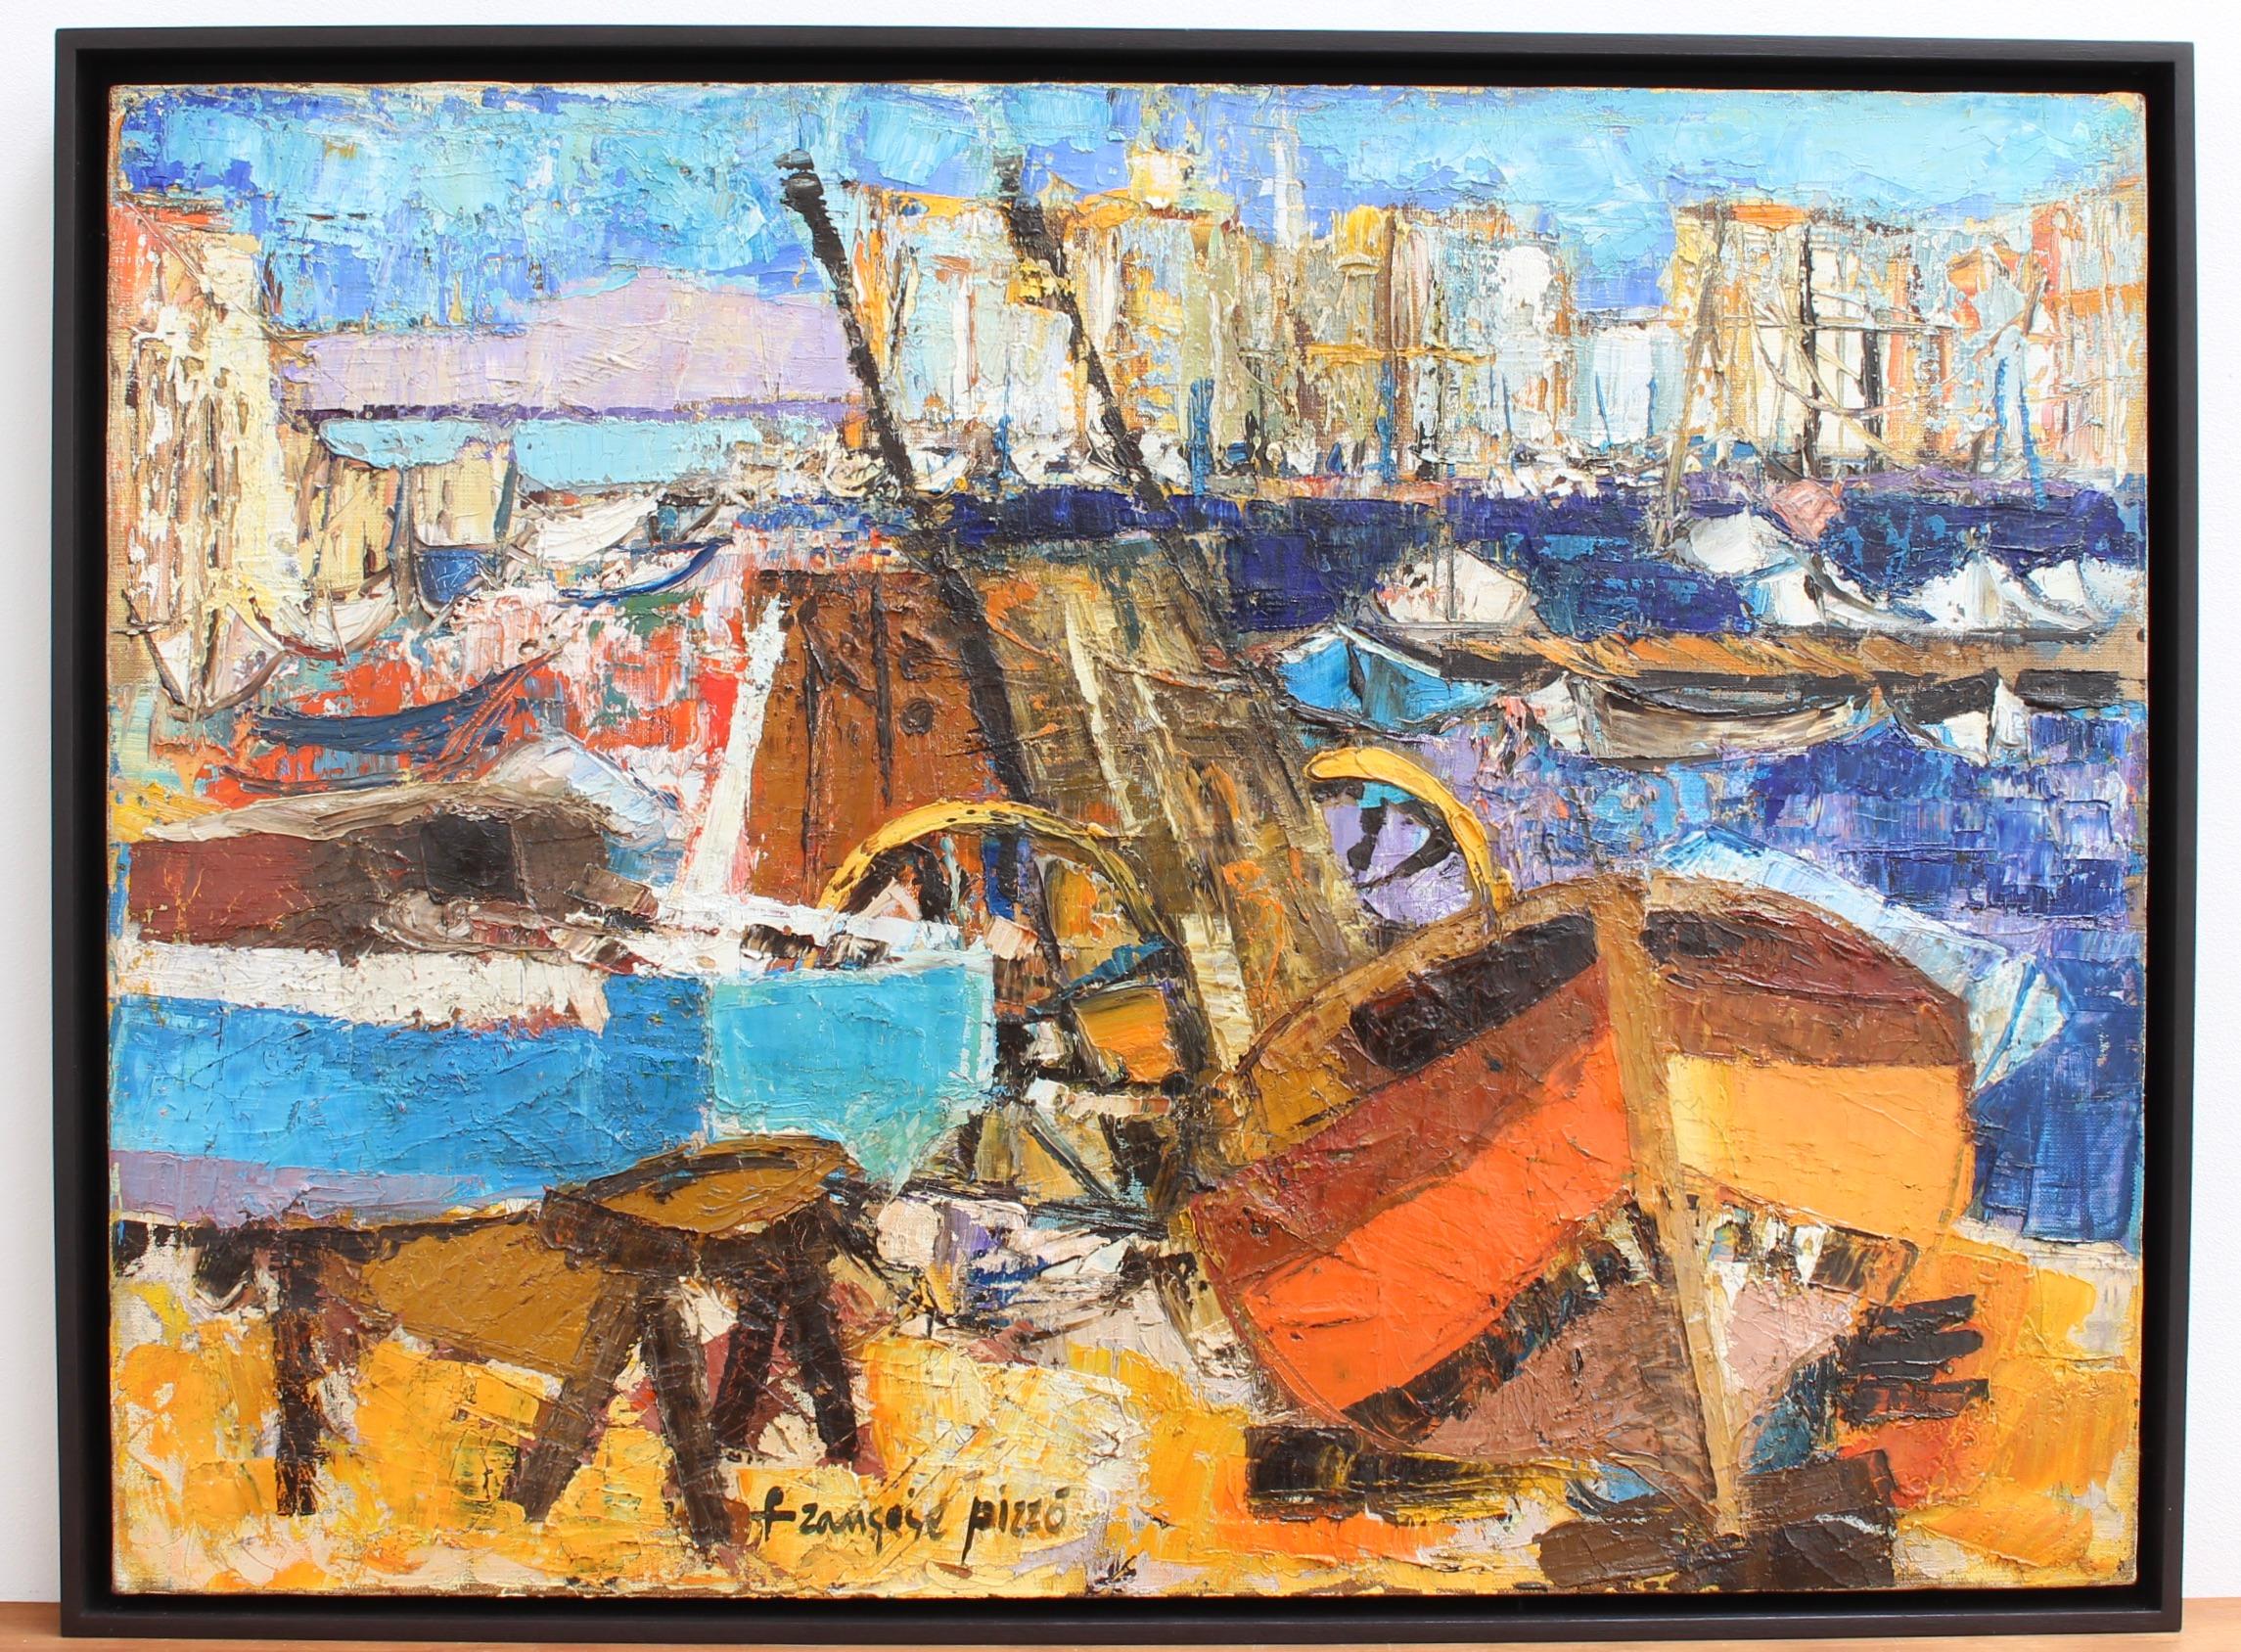 The Old Port Marseille - Painting by Françoise Pirró